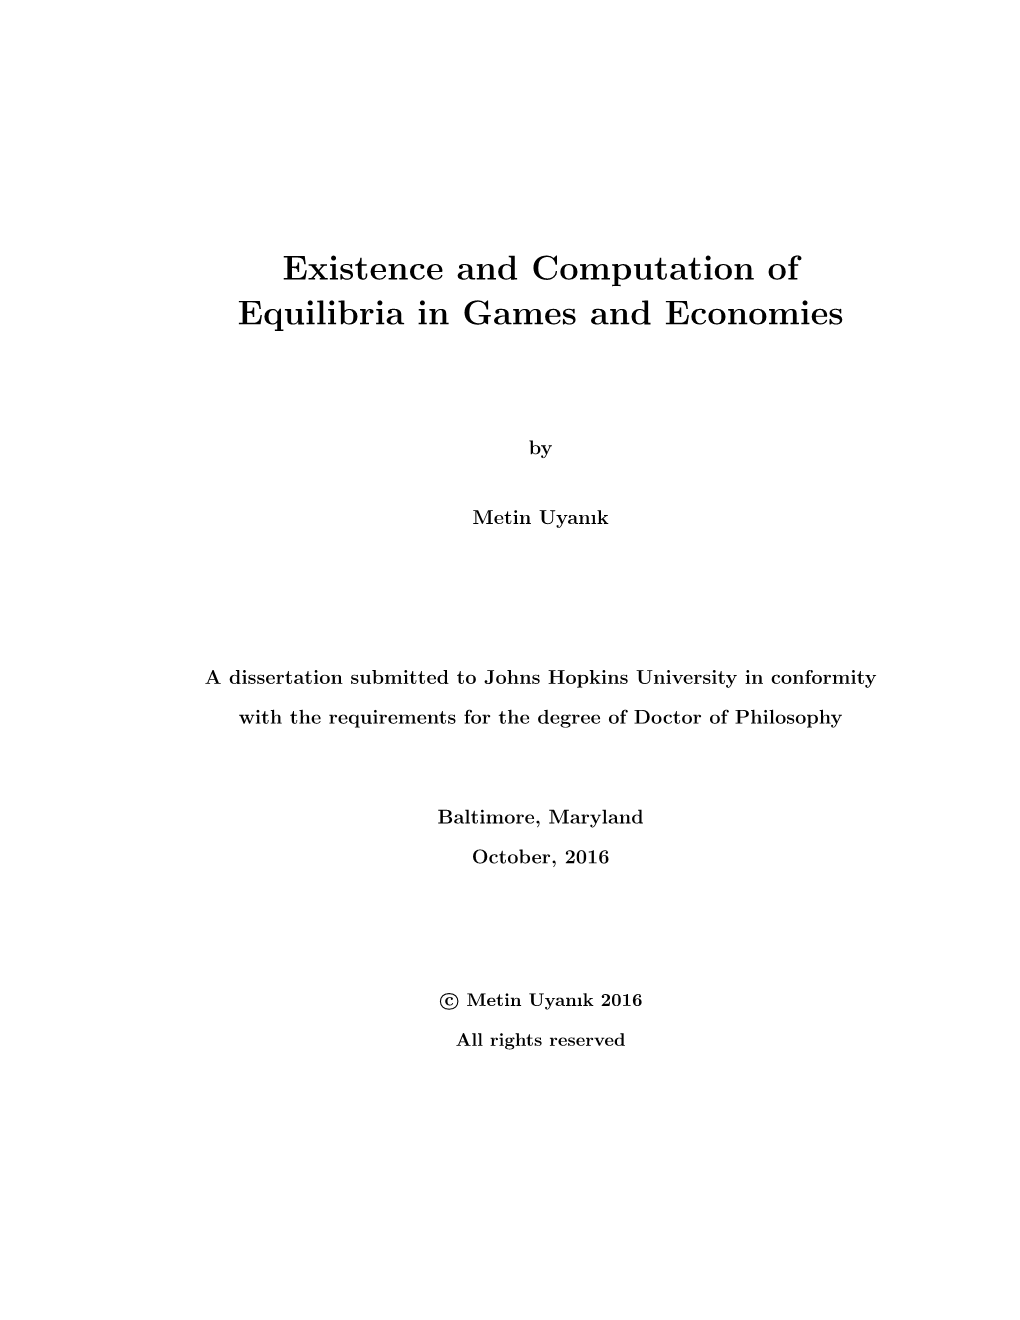 Existence and Computation of Equilibria in Games and Economies